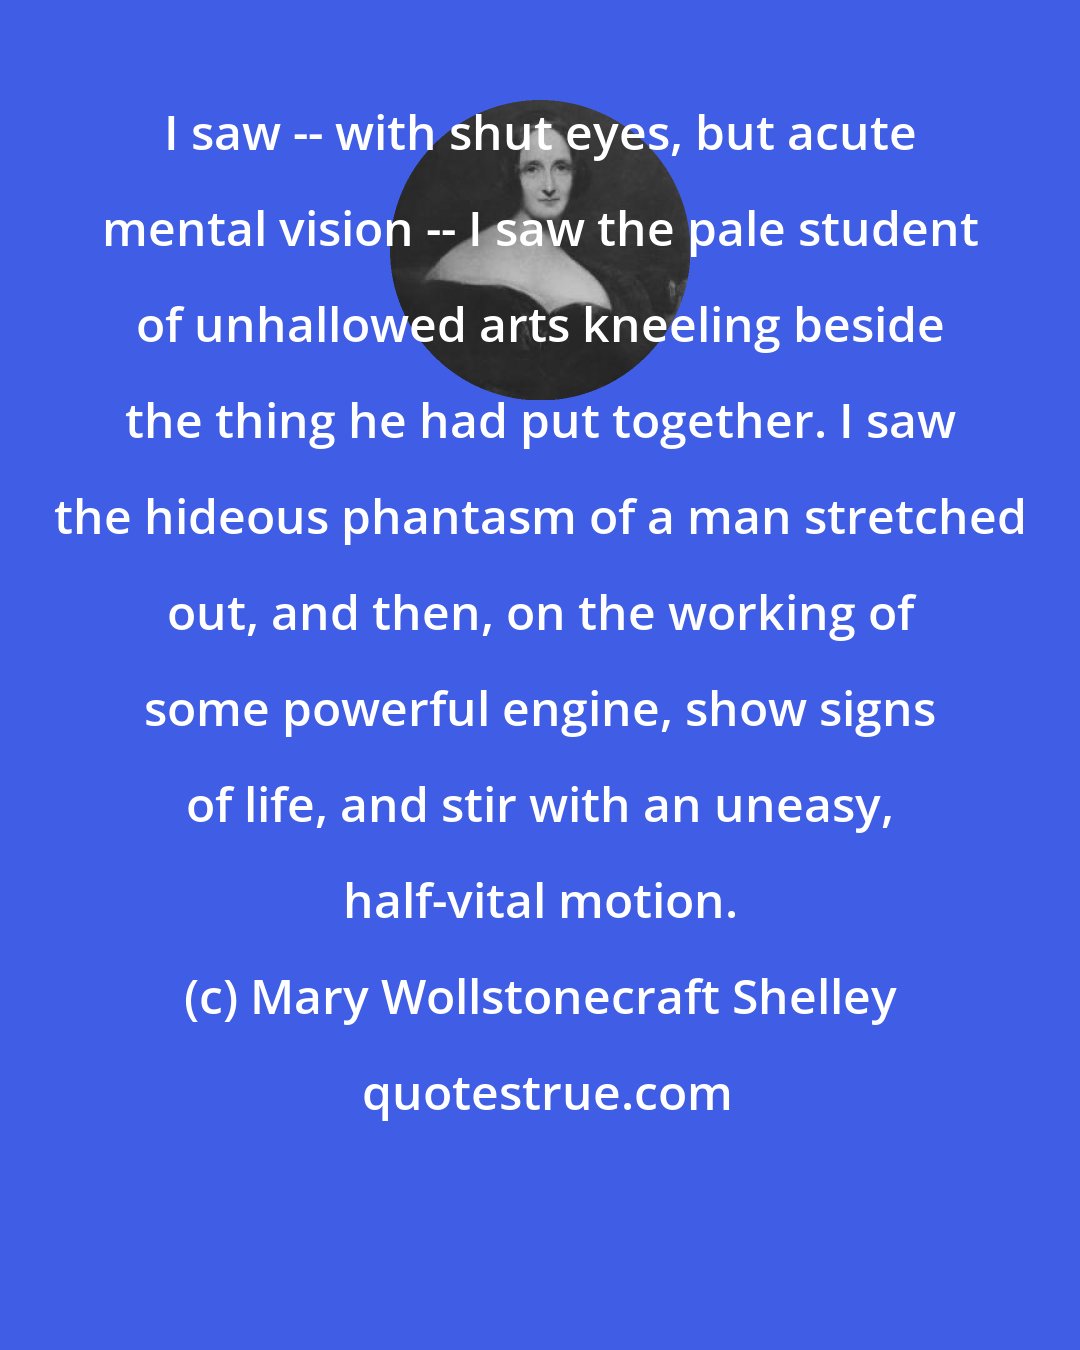 Mary Wollstonecraft Shelley: I saw -- with shut eyes, but acute mental vision -- I saw the pale student of unhallowed arts kneeling beside the thing he had put together. I saw the hideous phantasm of a man stretched out, and then, on the working of some powerful engine, show signs of life, and stir with an uneasy, half-vital motion.